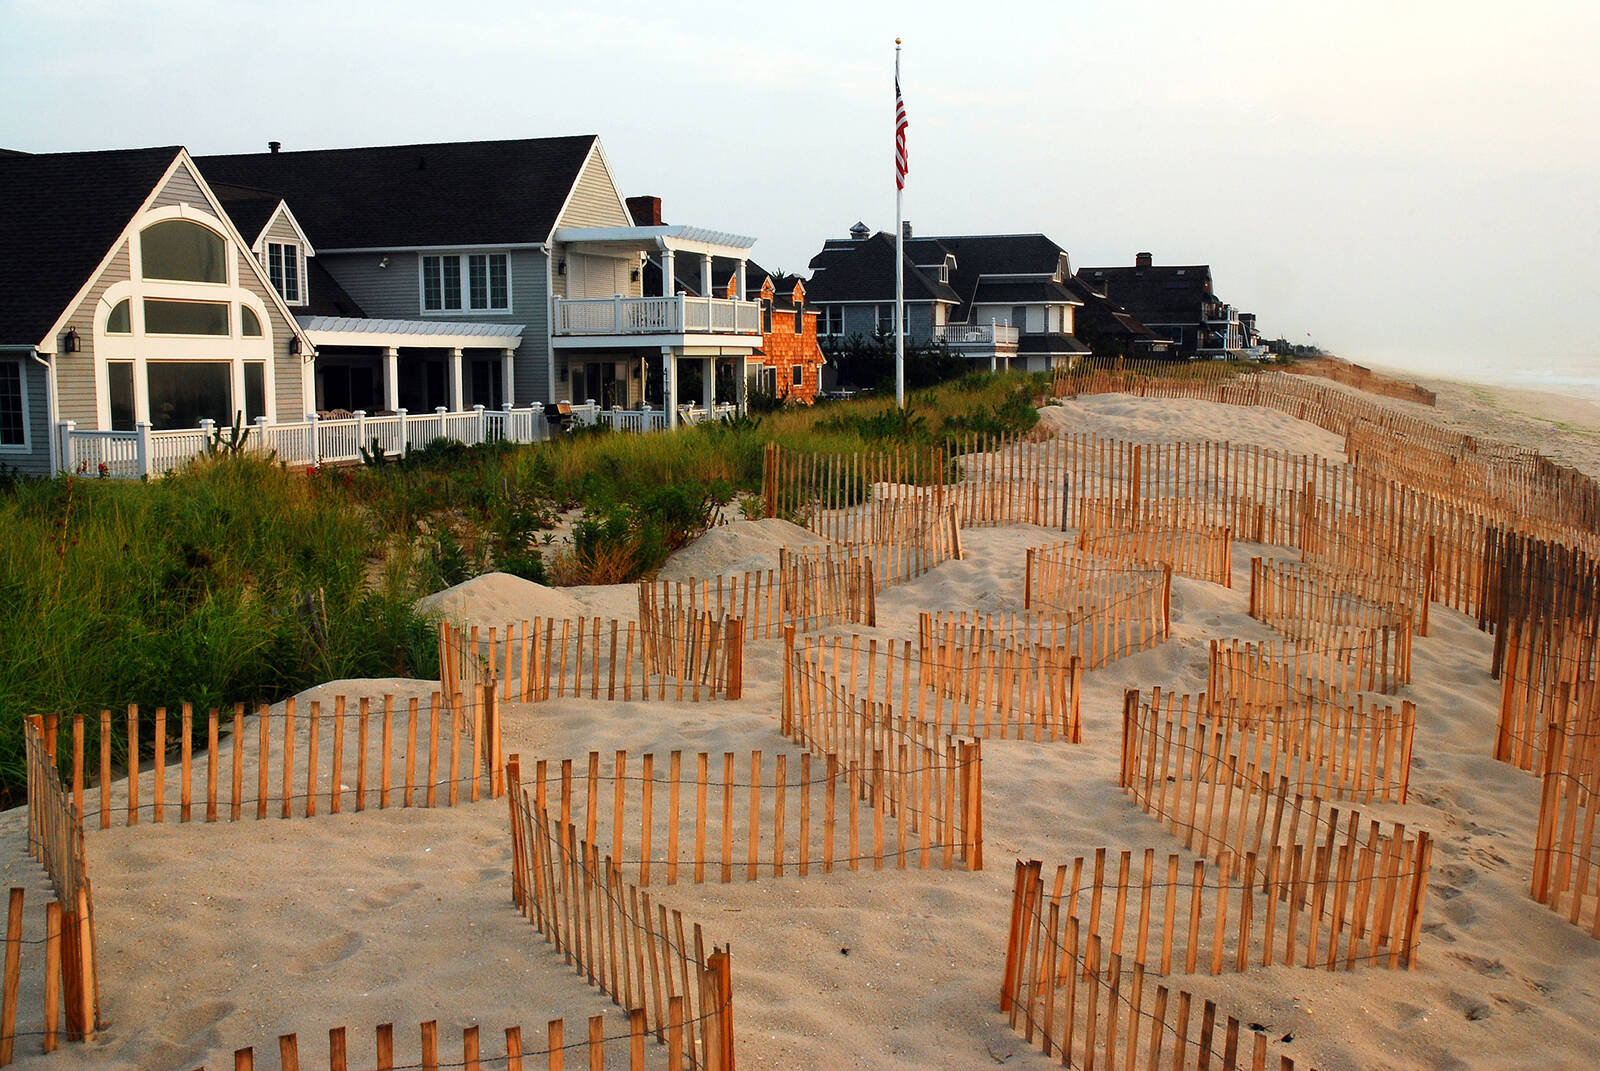 Houses on the Jersey Shore. Dreamstime | TNS